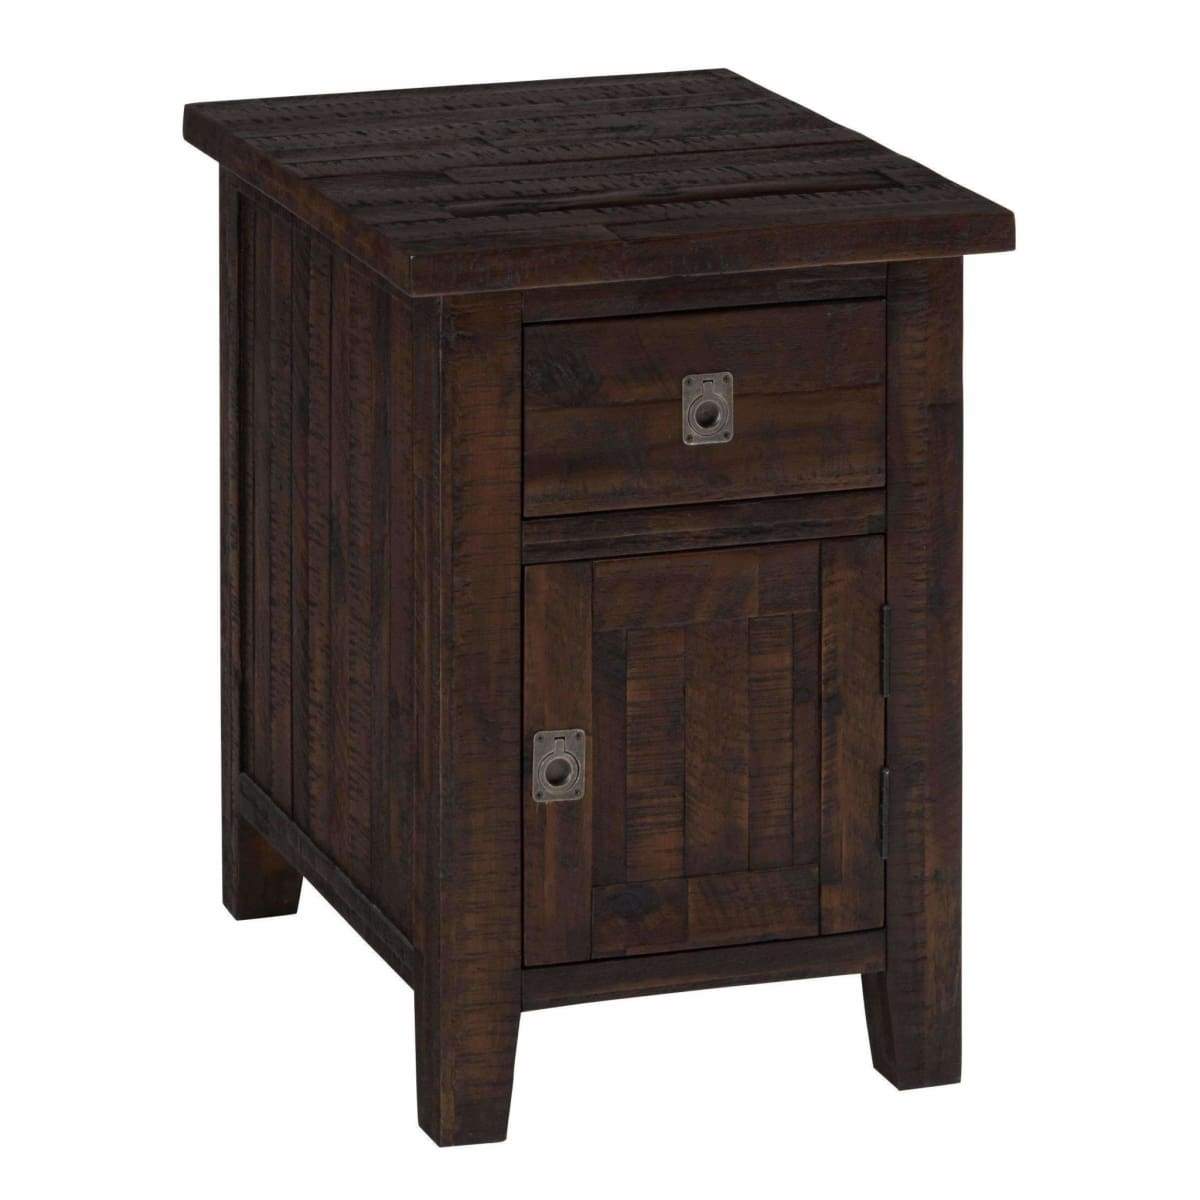 Kona Grove Cabinet Chairside Table - END TABLE/SIDE TABLE